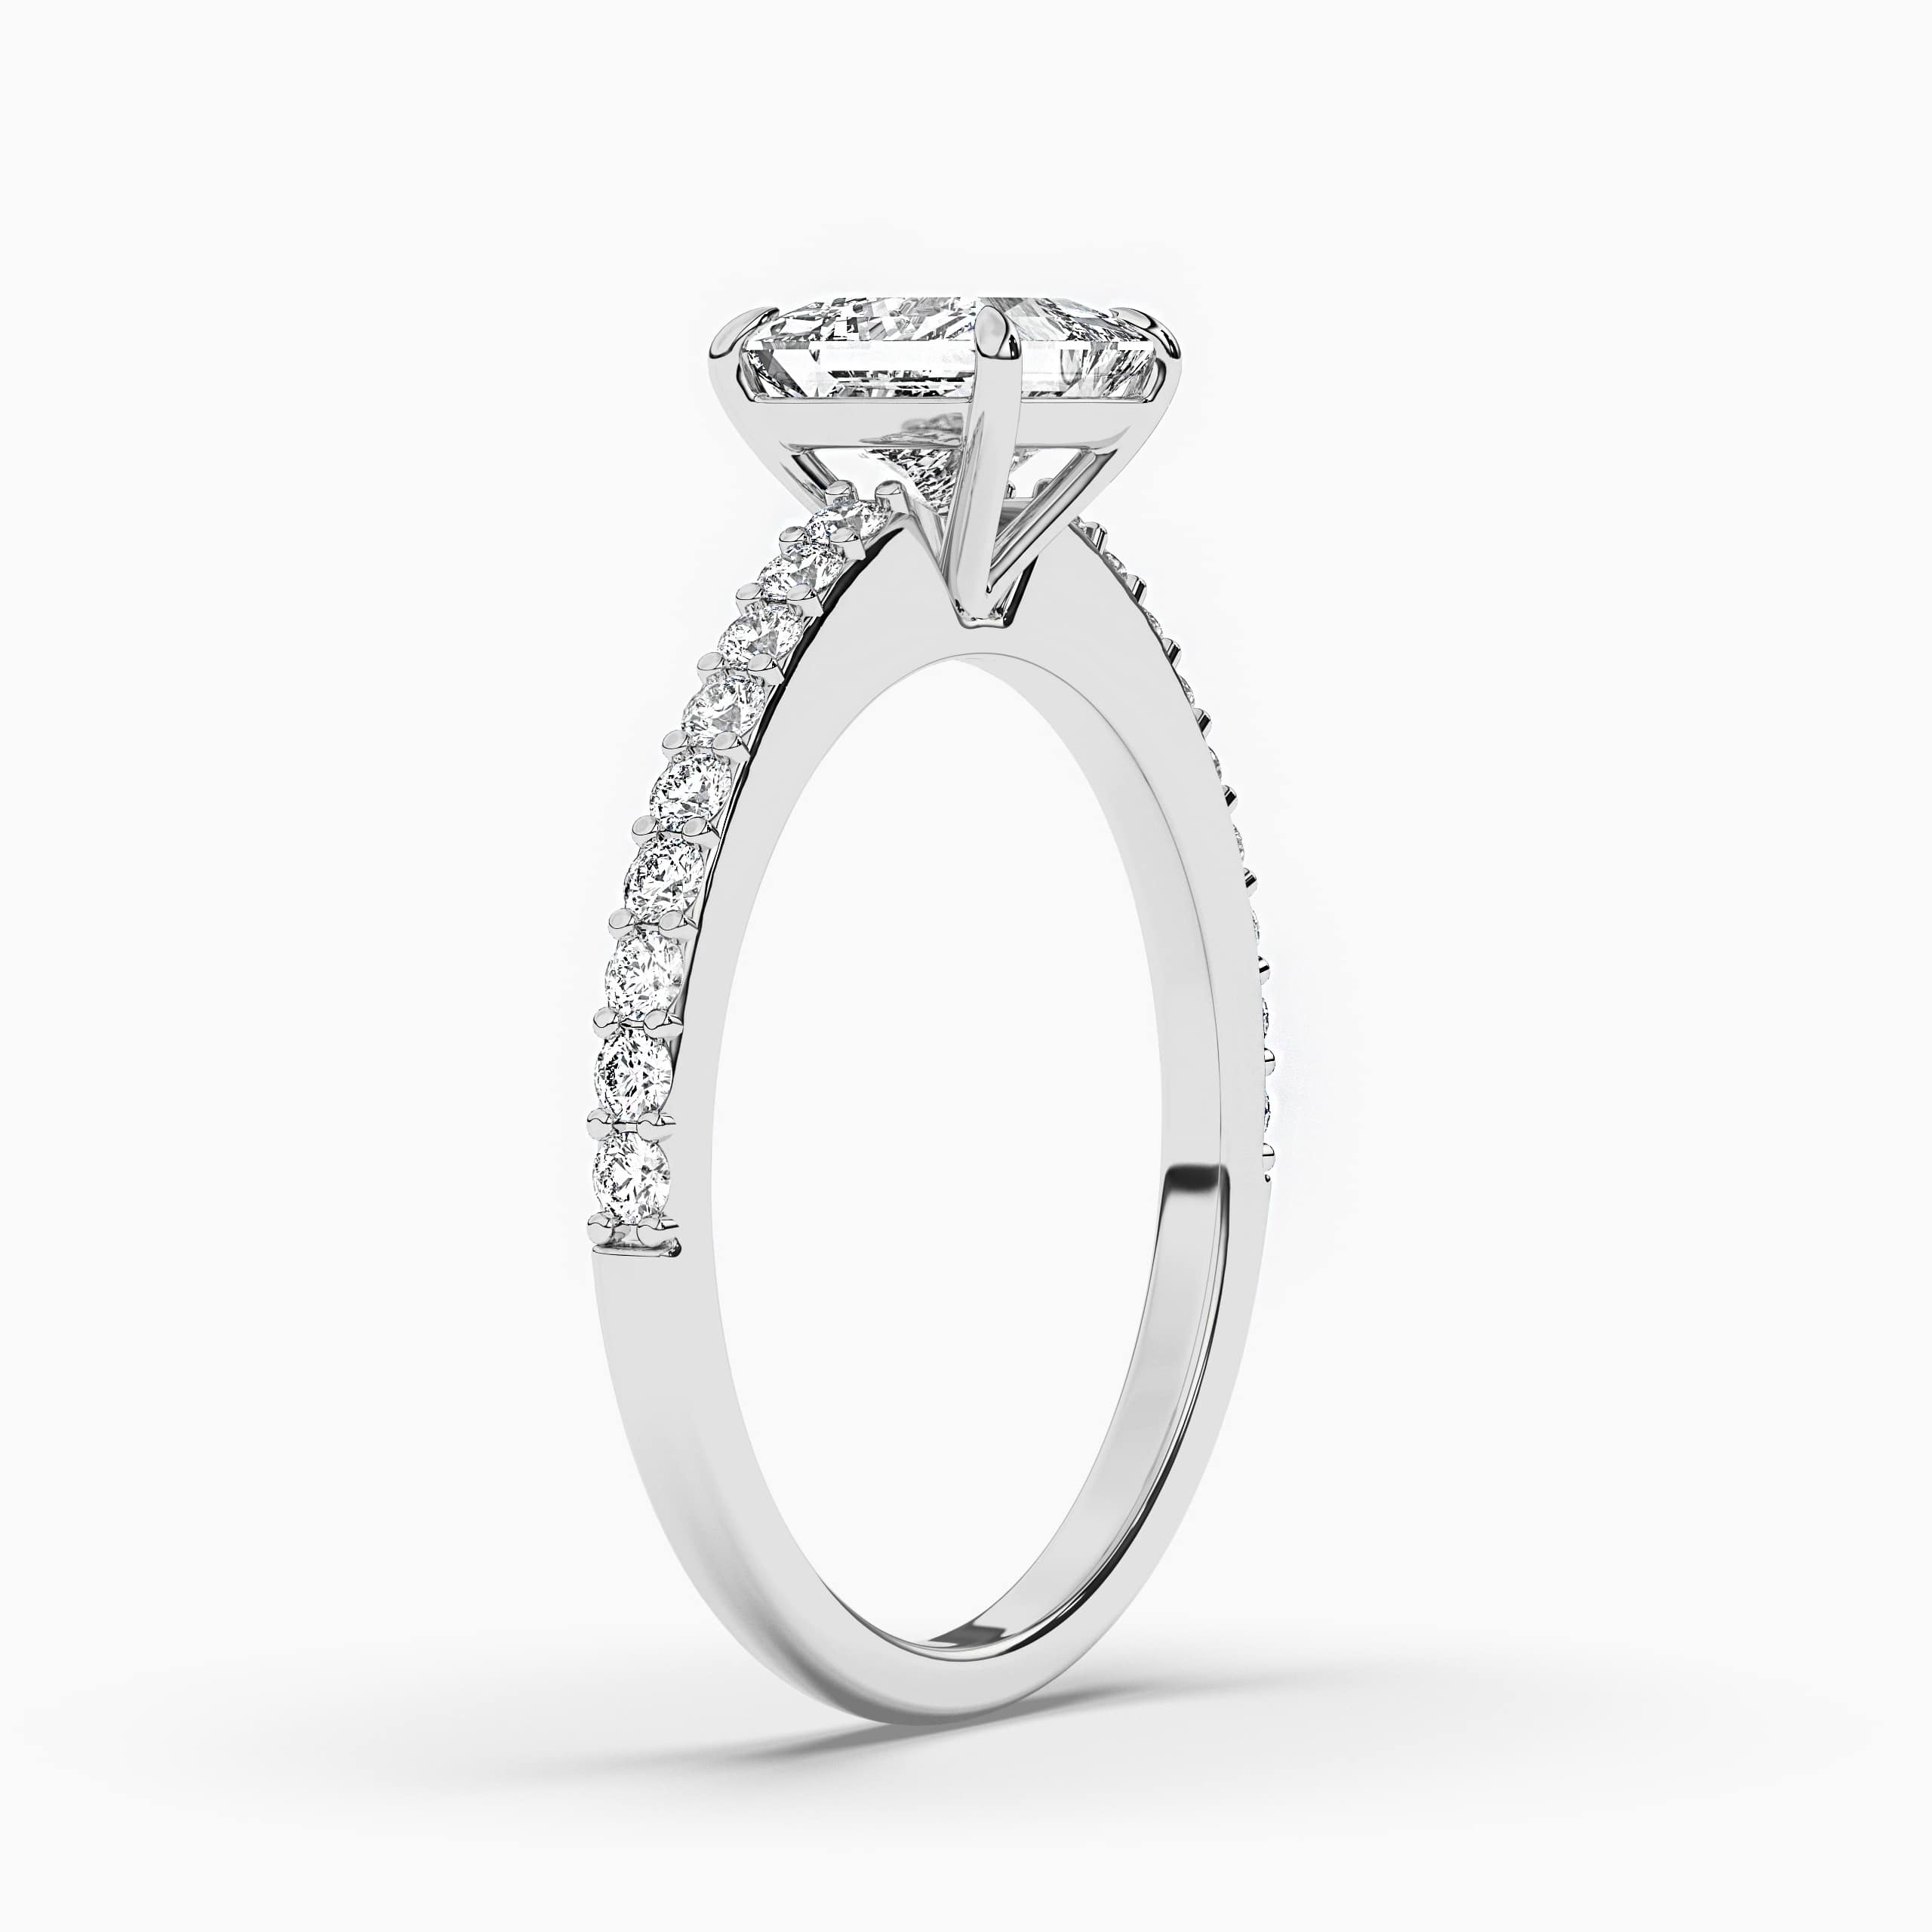 1.5carat Princess Lab Diamond Solitaire Engagement Ring with Side Accents